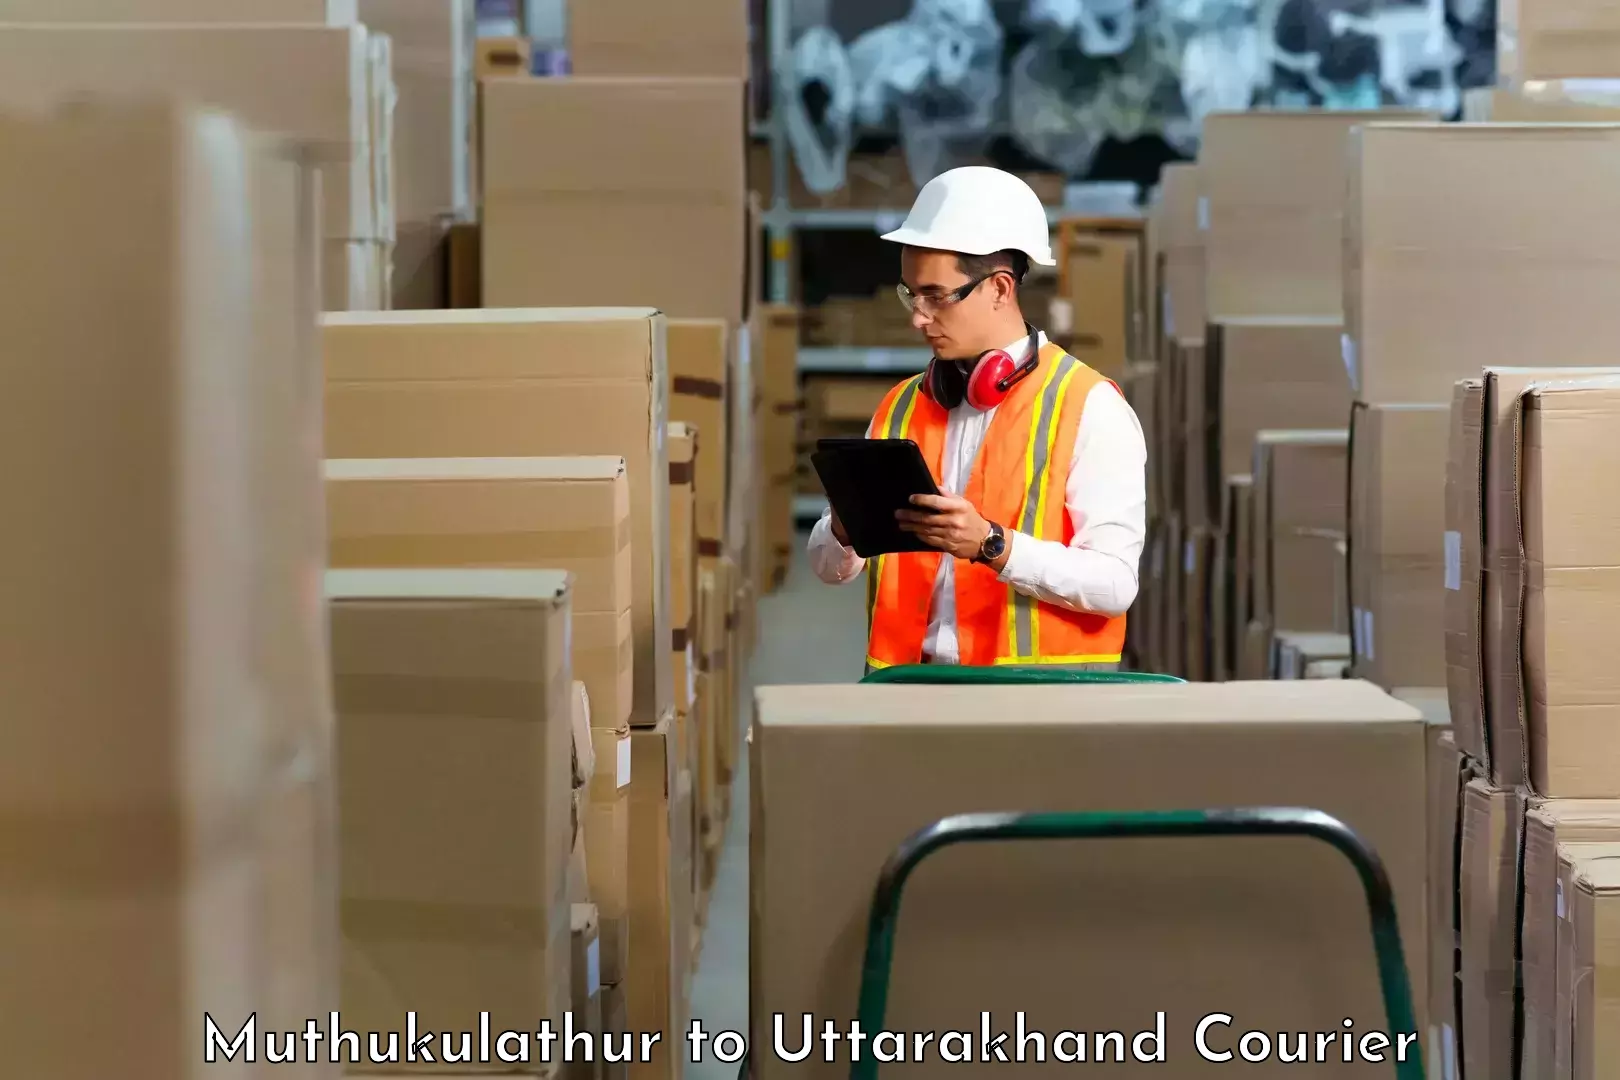 Automated parcel services Muthukulathur to IIT Roorkee